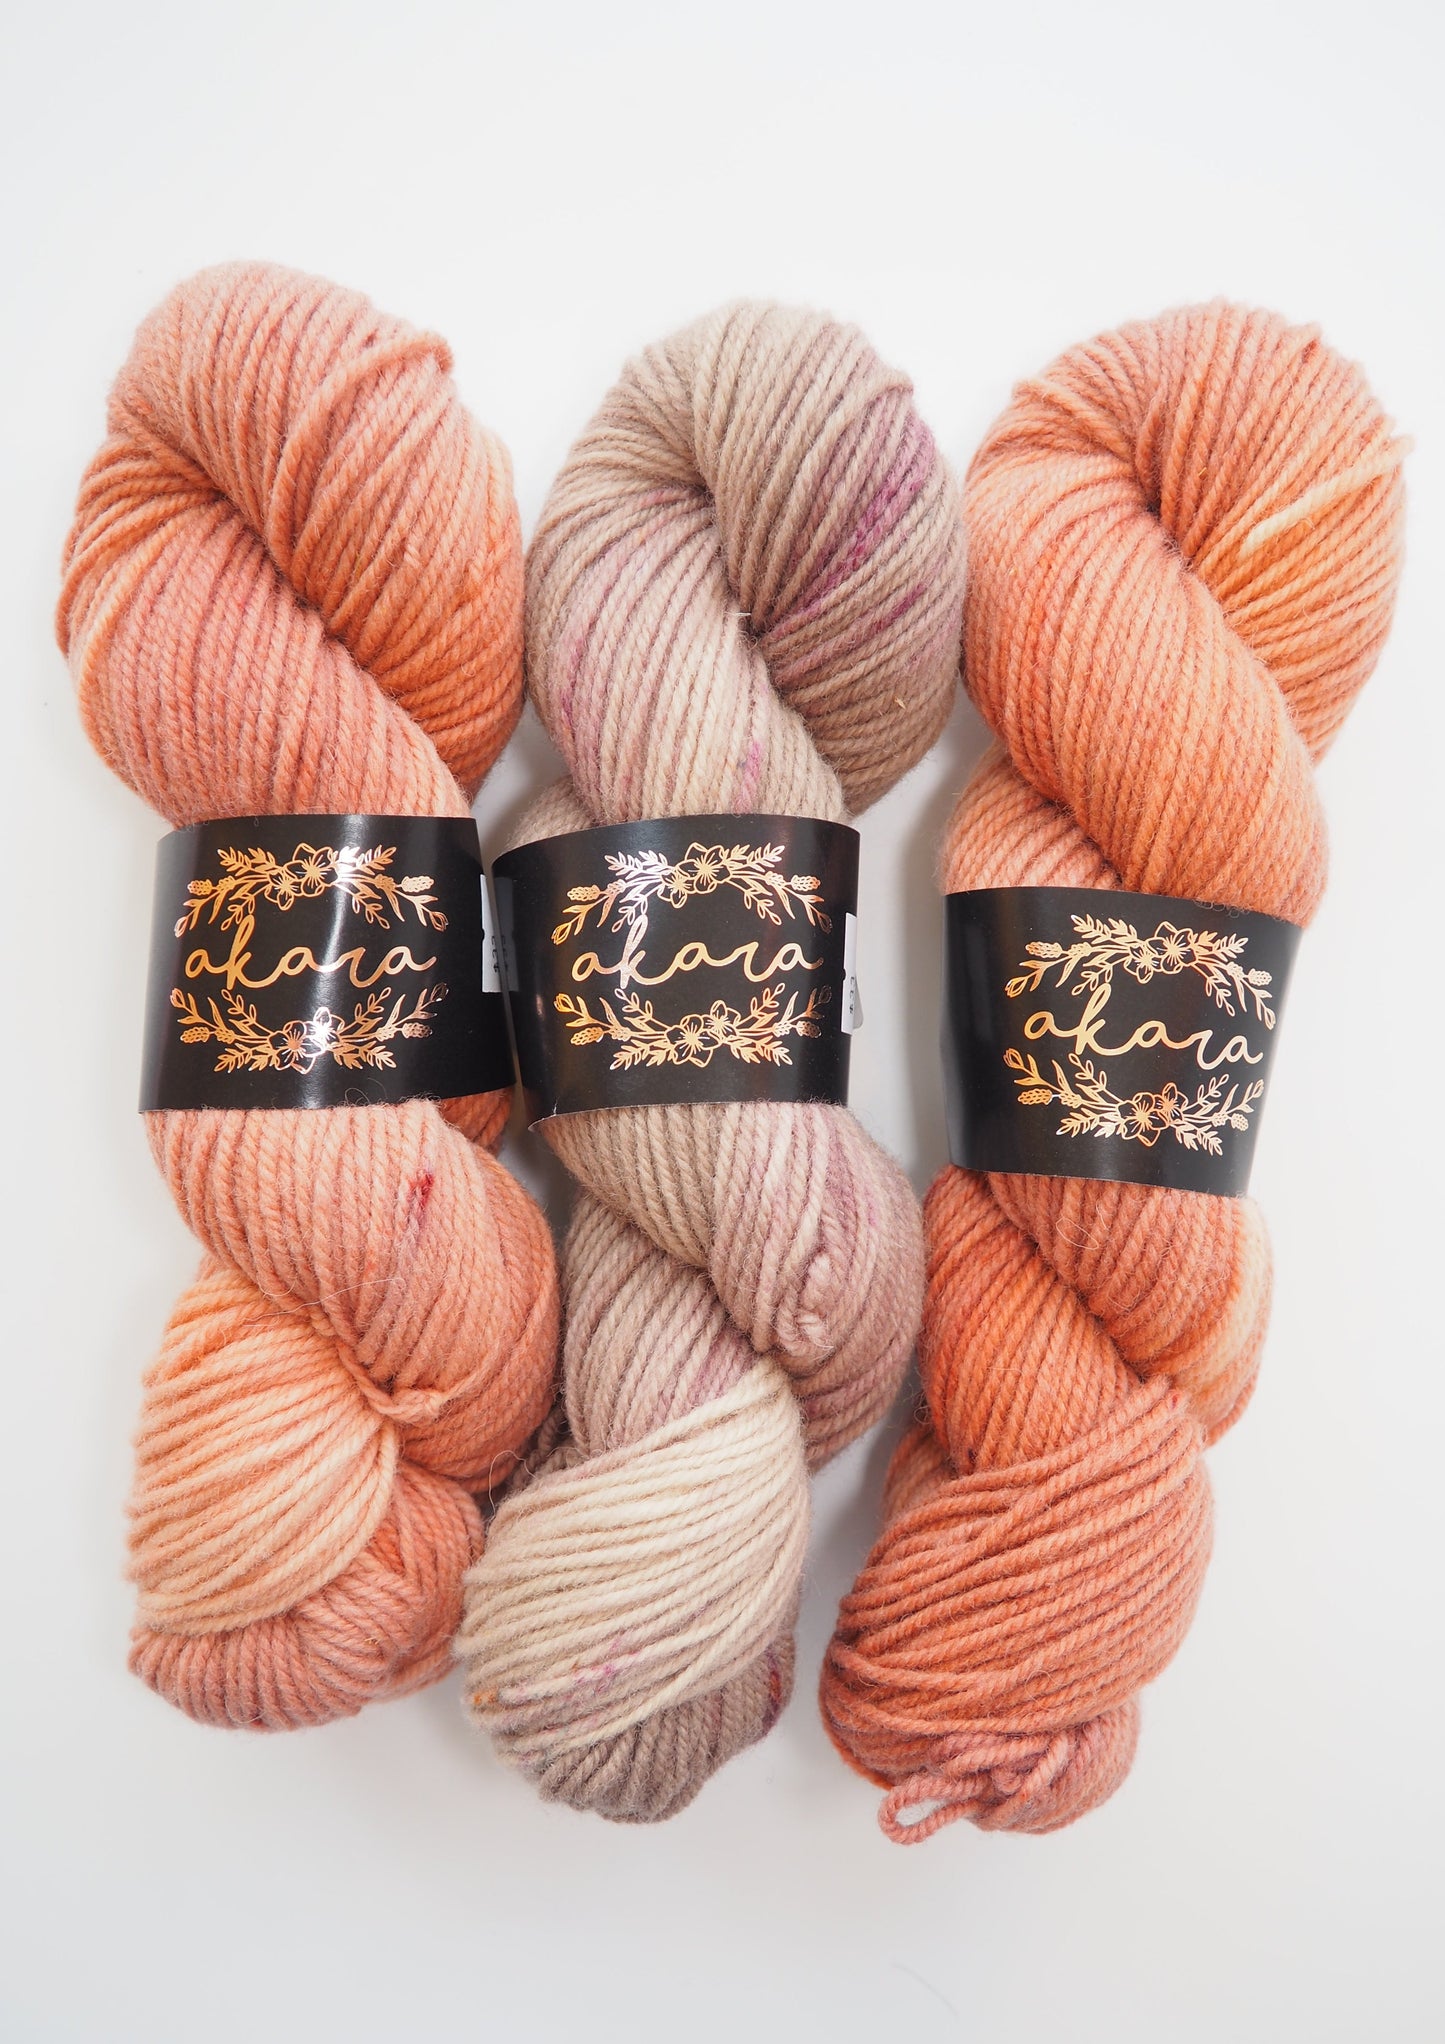 Image of three skeins of Akara Dorset Aran yarn, featuring one in Frozen Berries color and two in Rose Gold, displaying their vibrant colors and rustic texture